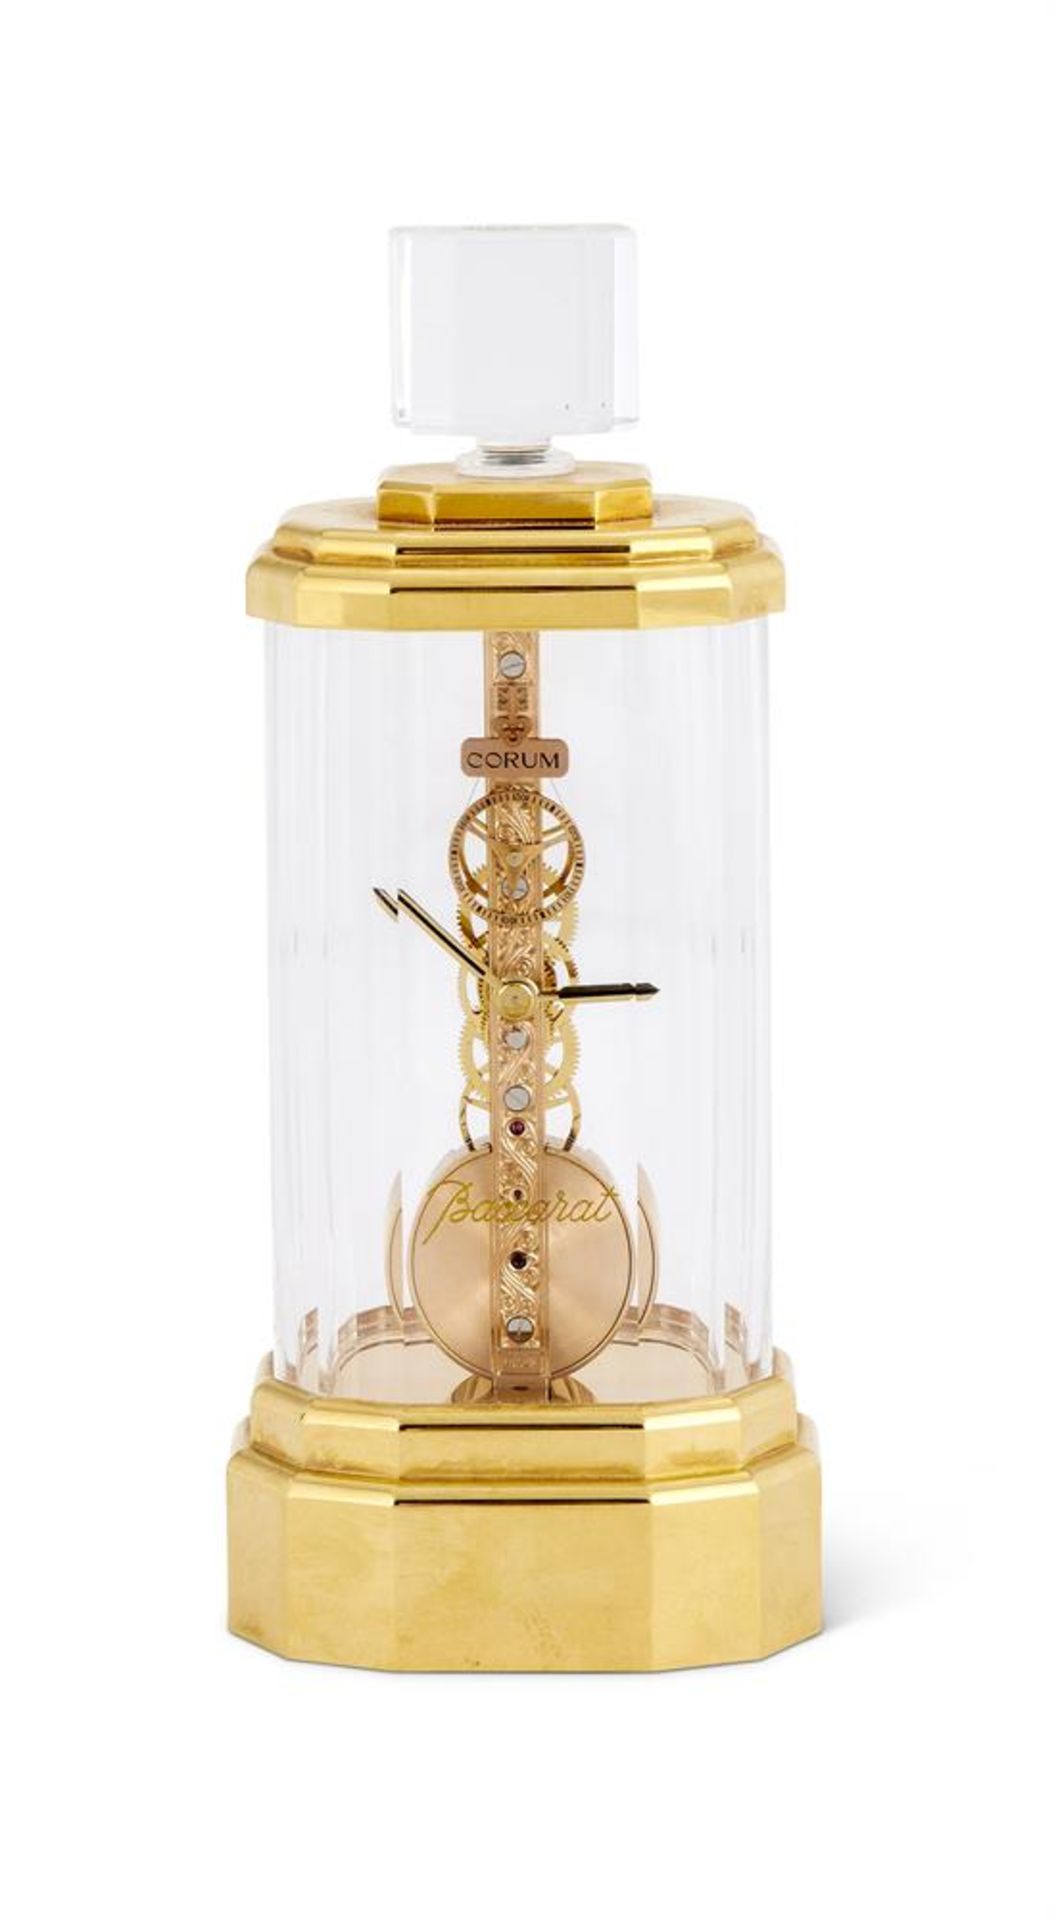 A CONTEMPORARY BACCARAT CRYSTAL AND GILT METAL DESK TIMEPIECE IN THE FORM OF A SCENT BOTTLE